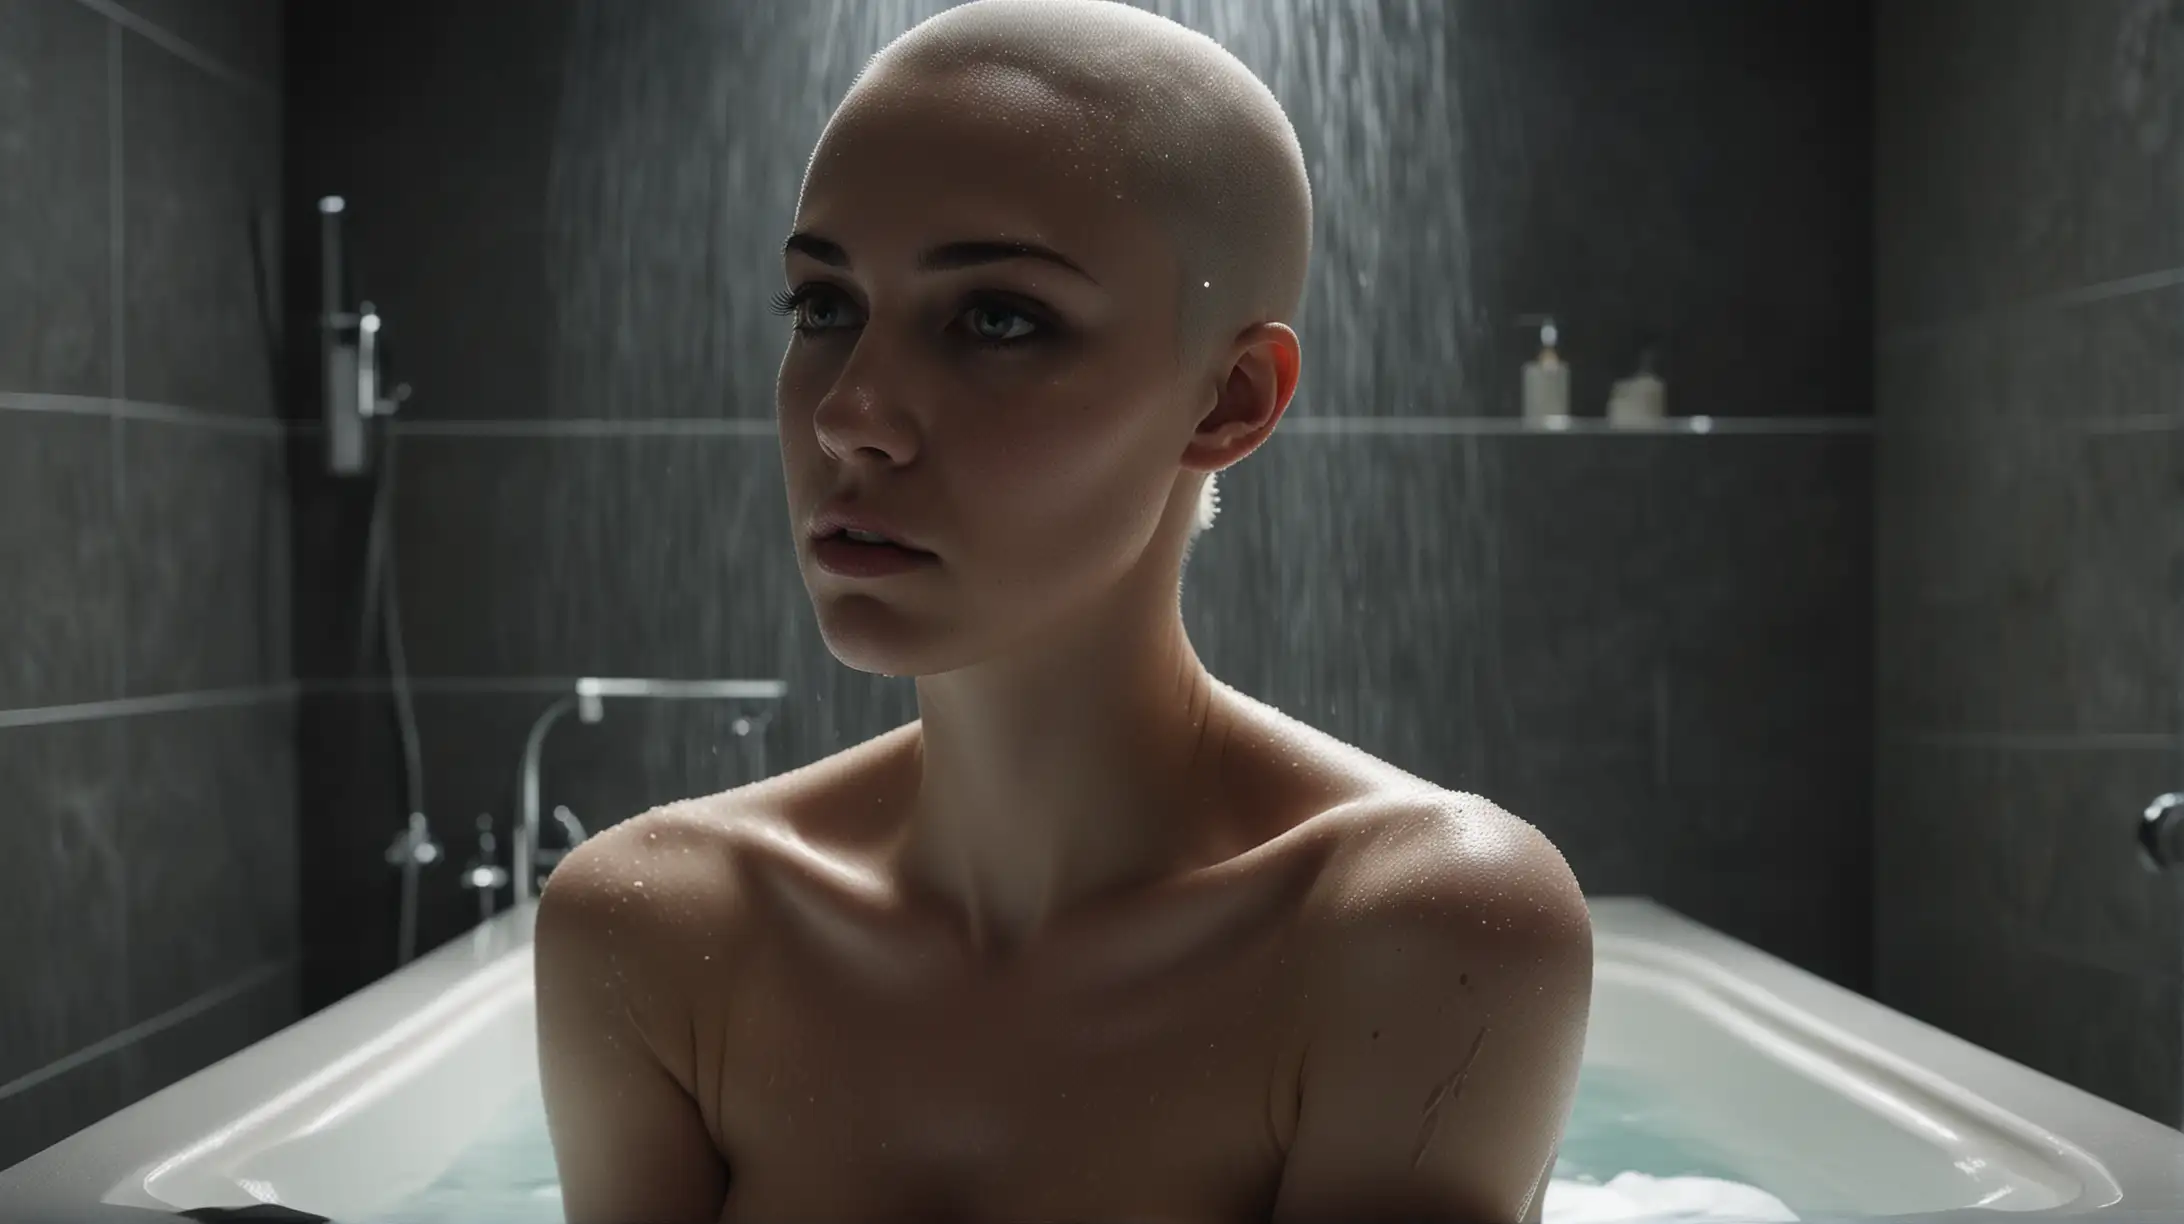 dark sci-fi, minimalist architecture and interiors, large bath in dark bathroom, minimalist light strips in background, steam, young women in bath, bald heads, black eyeballs, naked, pale, sultry, exotic,

wide shot, highly detailed, random details, imperfection, detailed face, detailed body, detailed skin textures, skin pores, detailed background, detailed colours hues tones,